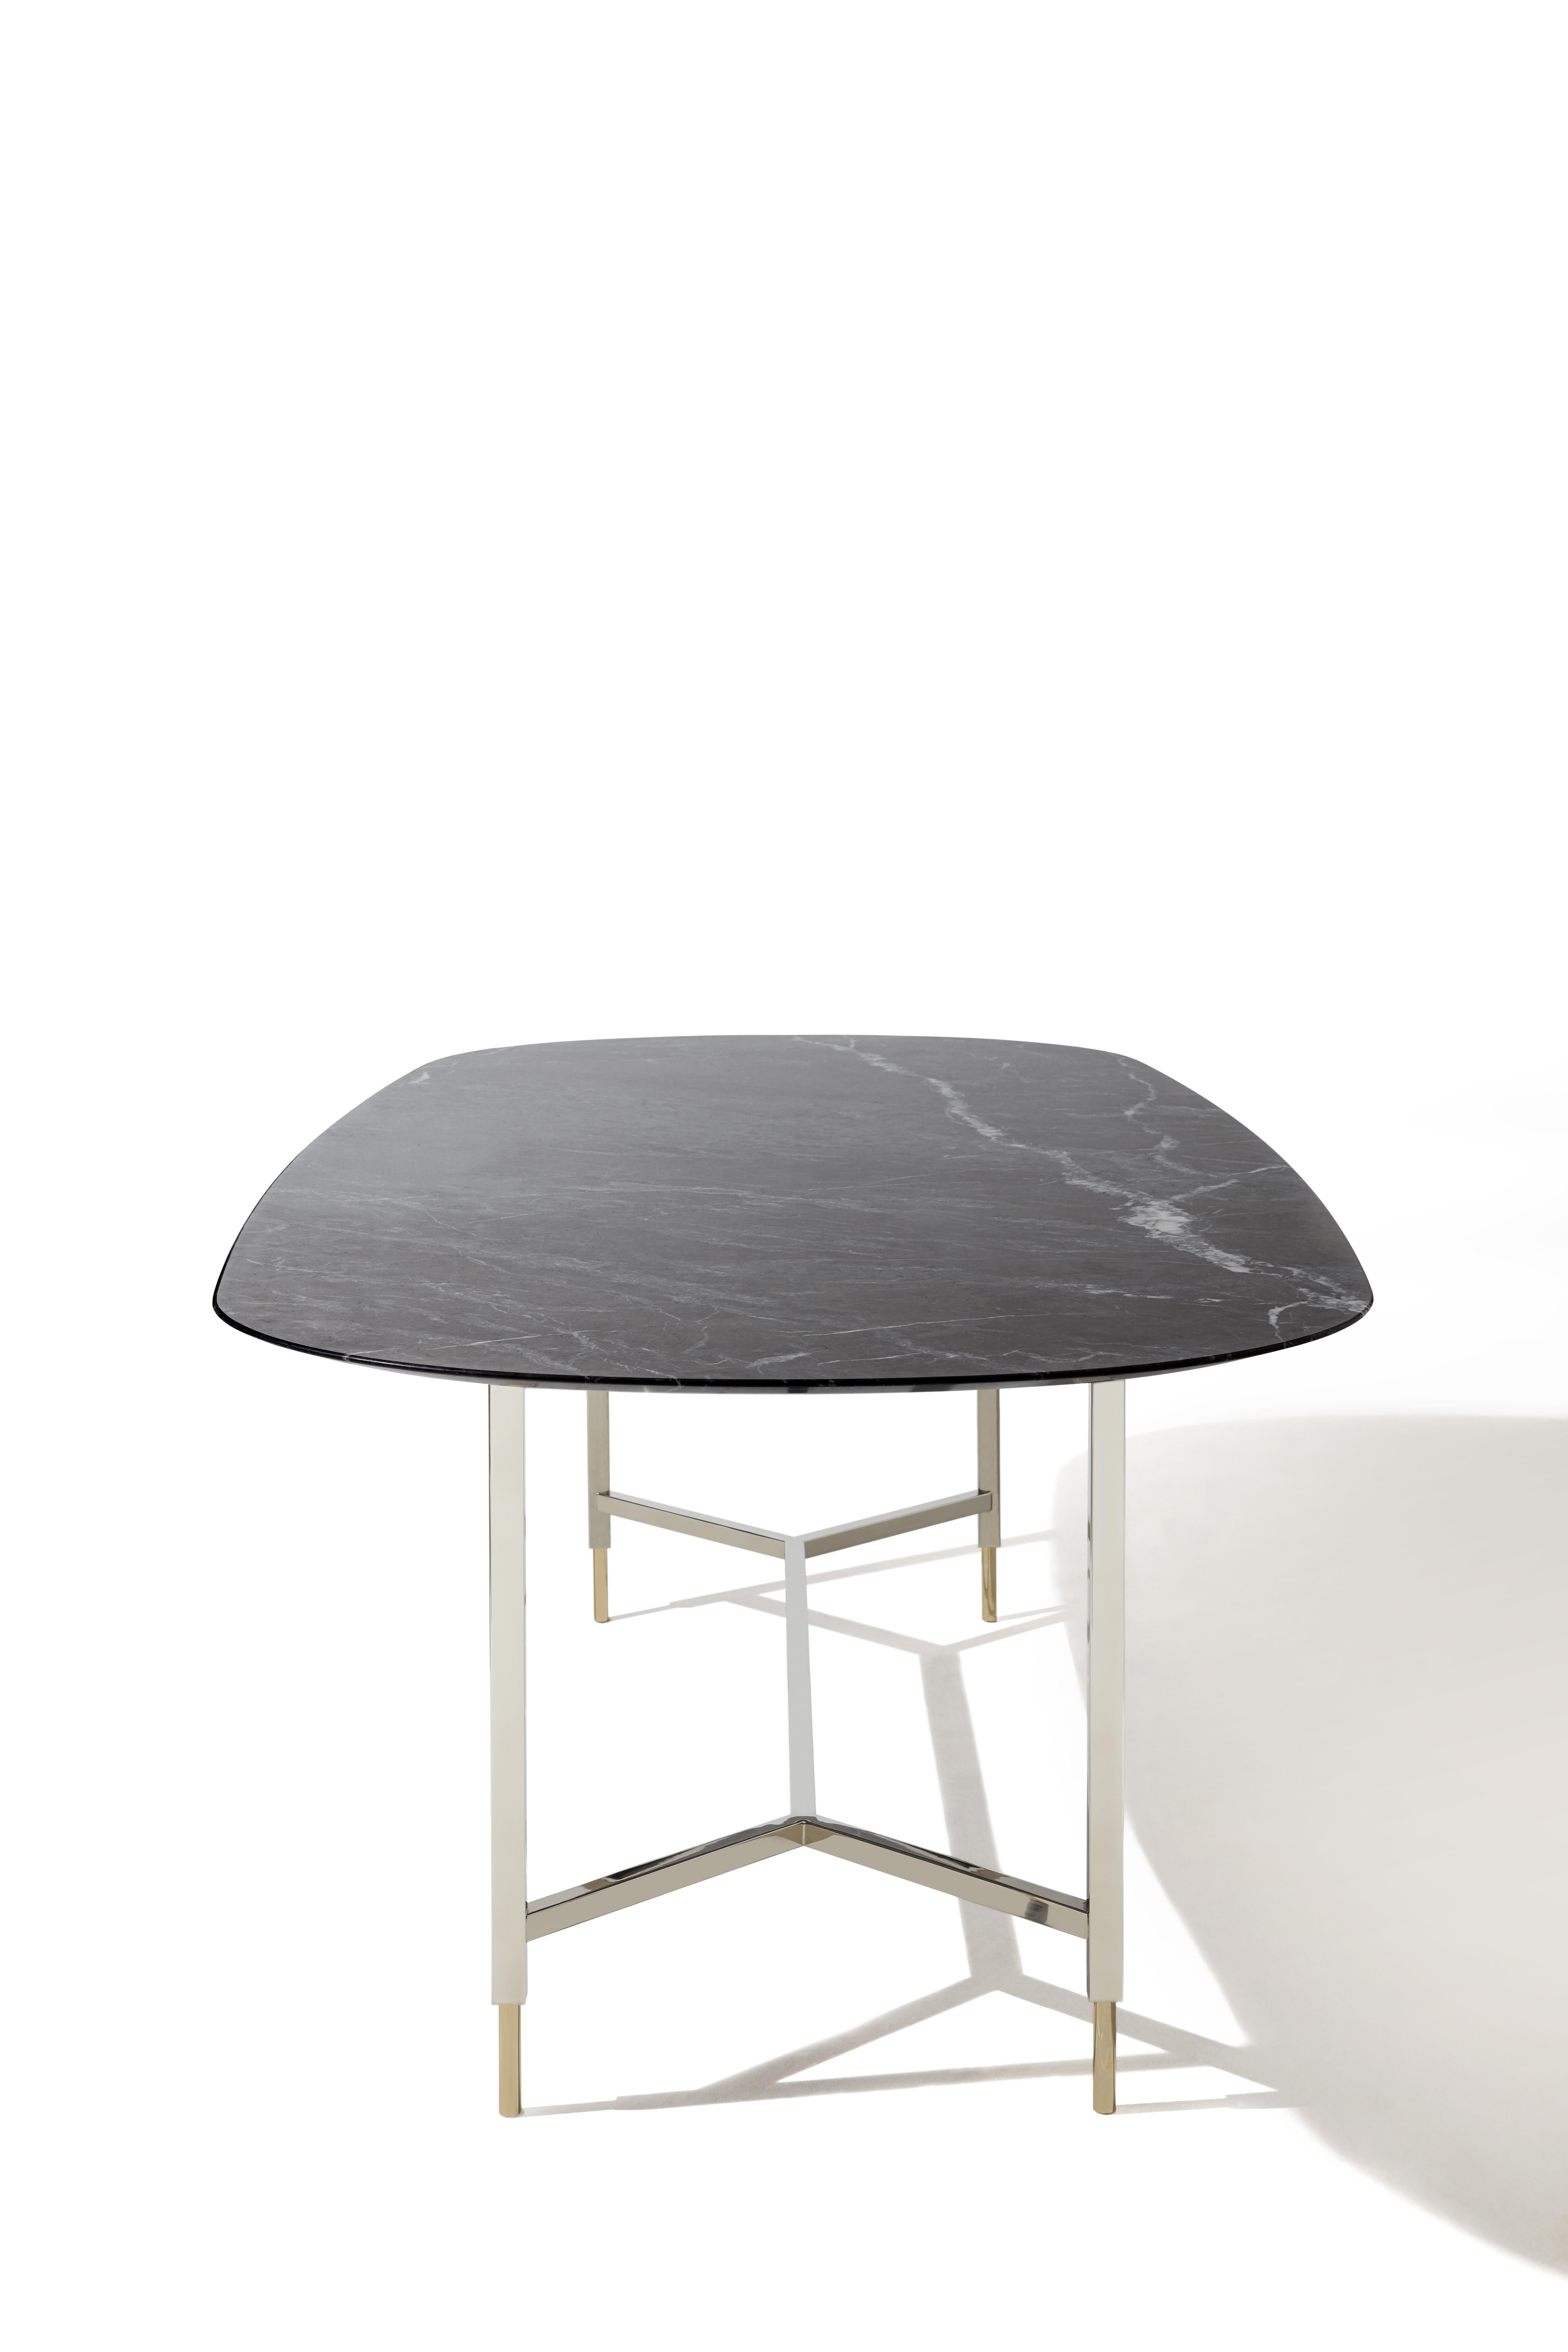 Banquet is a sculptural table that fits into the home in a delicate and elegant way.
Square tubular metal structure, polished nickel finish, glossy gold round section.
The designer Sam Baron said about it: